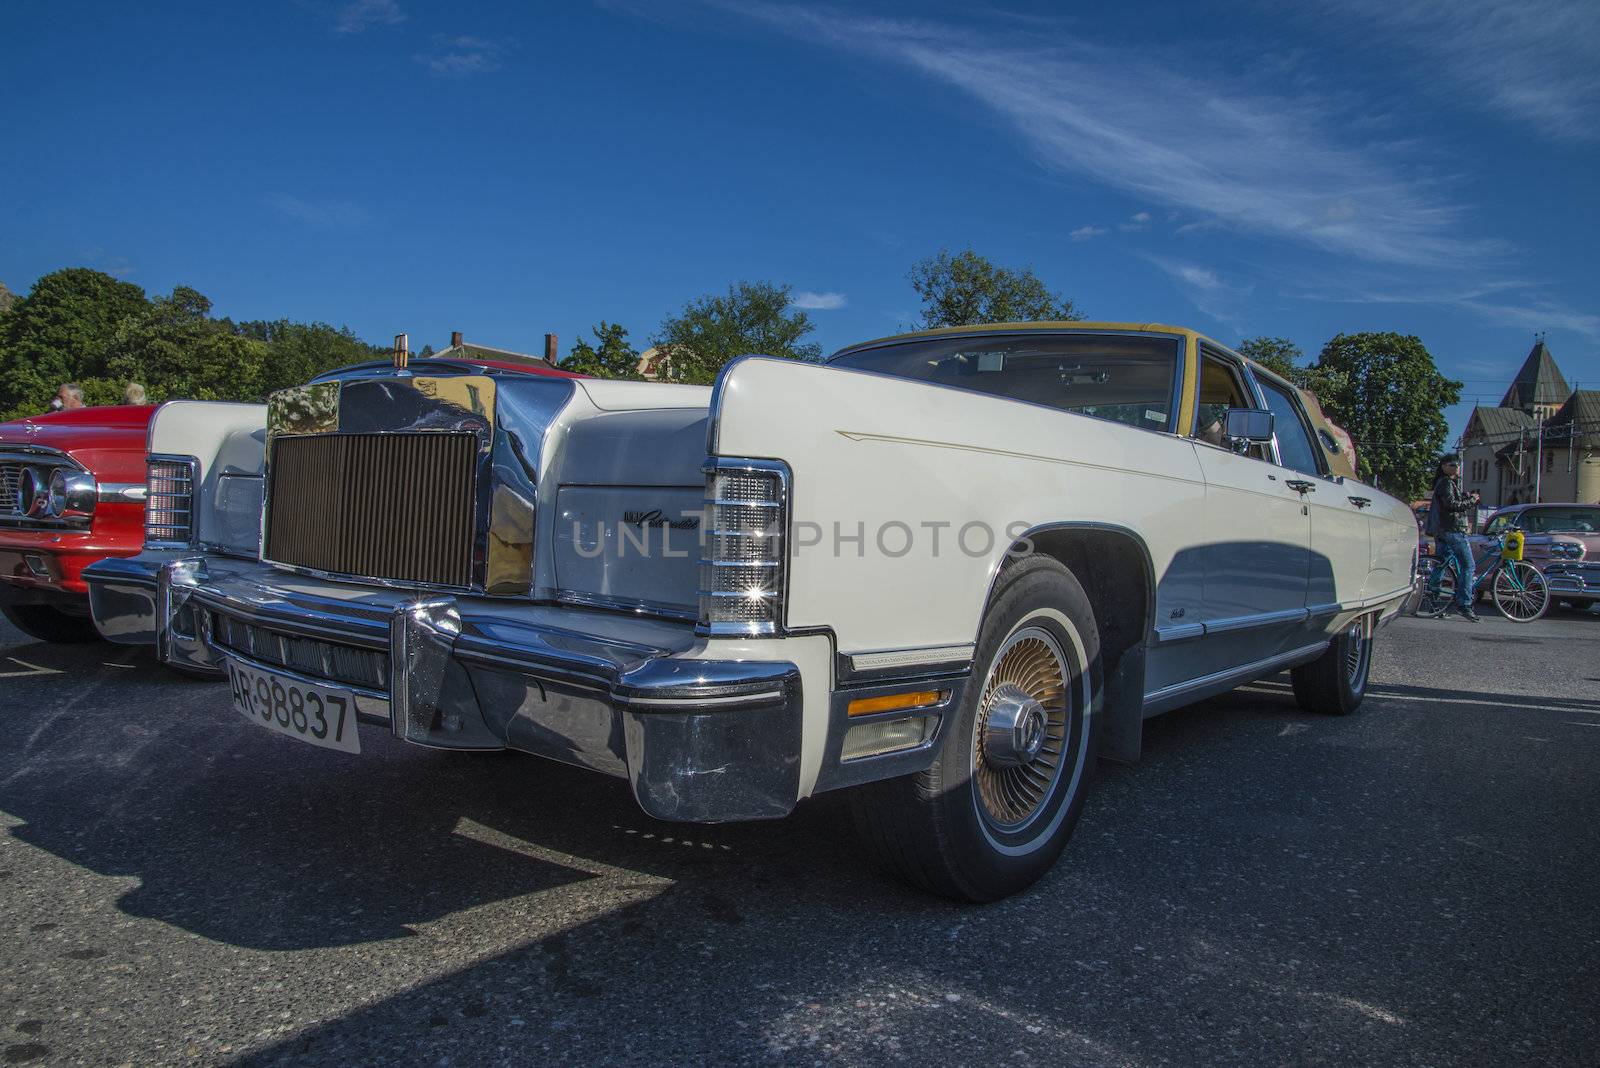 1975 lincoln continental by steirus